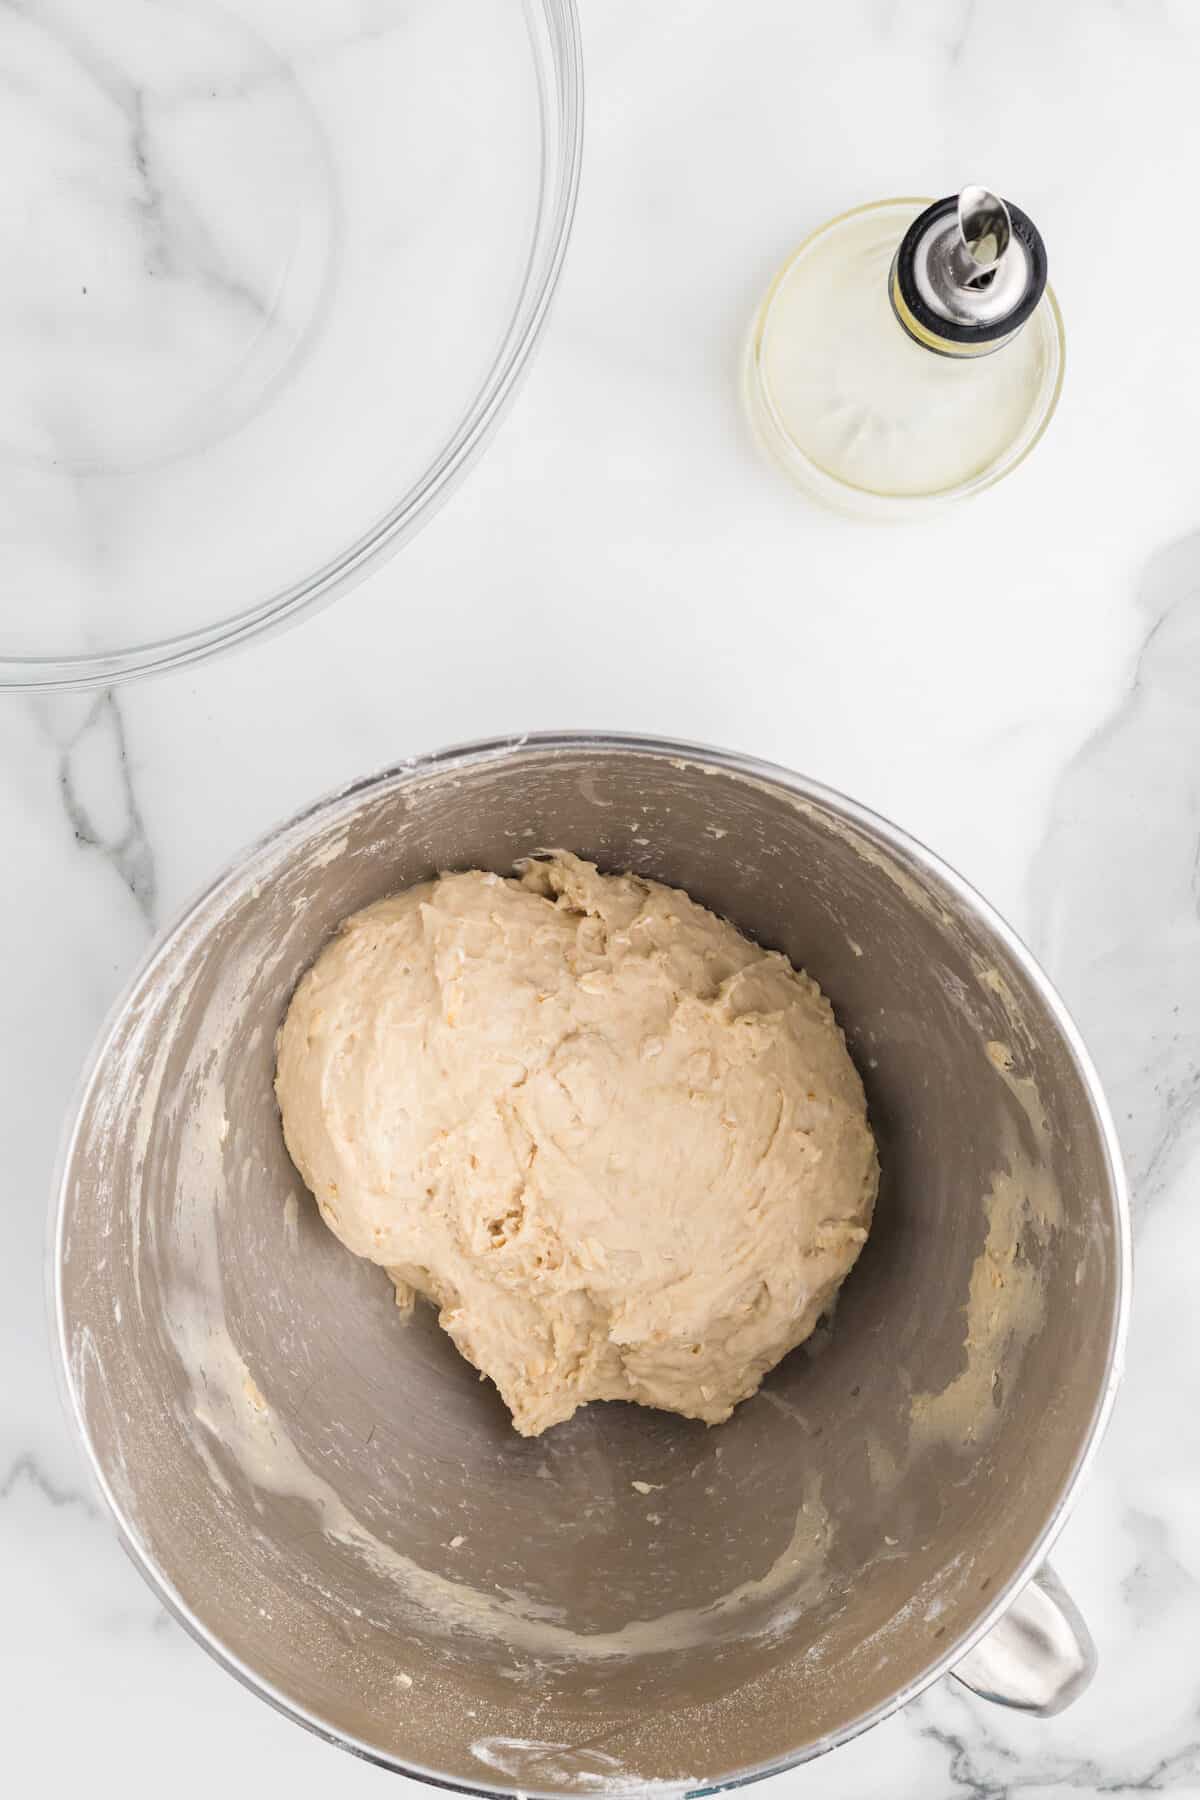 dough ball in the bowl of the stand mixer.